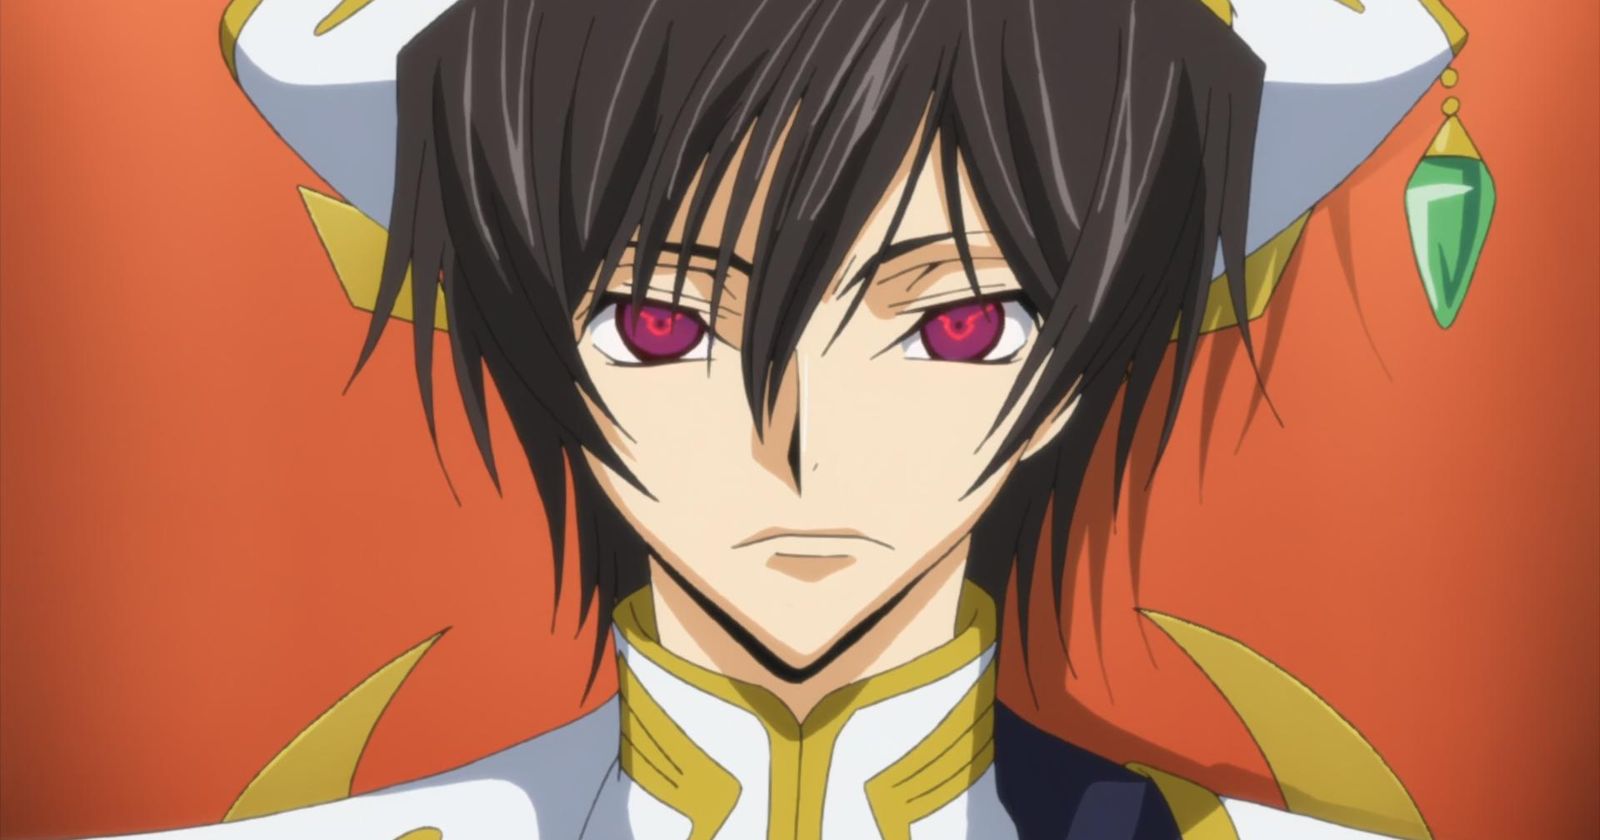 The Bernel Zone: All Hail Lelouch! 'Code Geass' Is Returning!